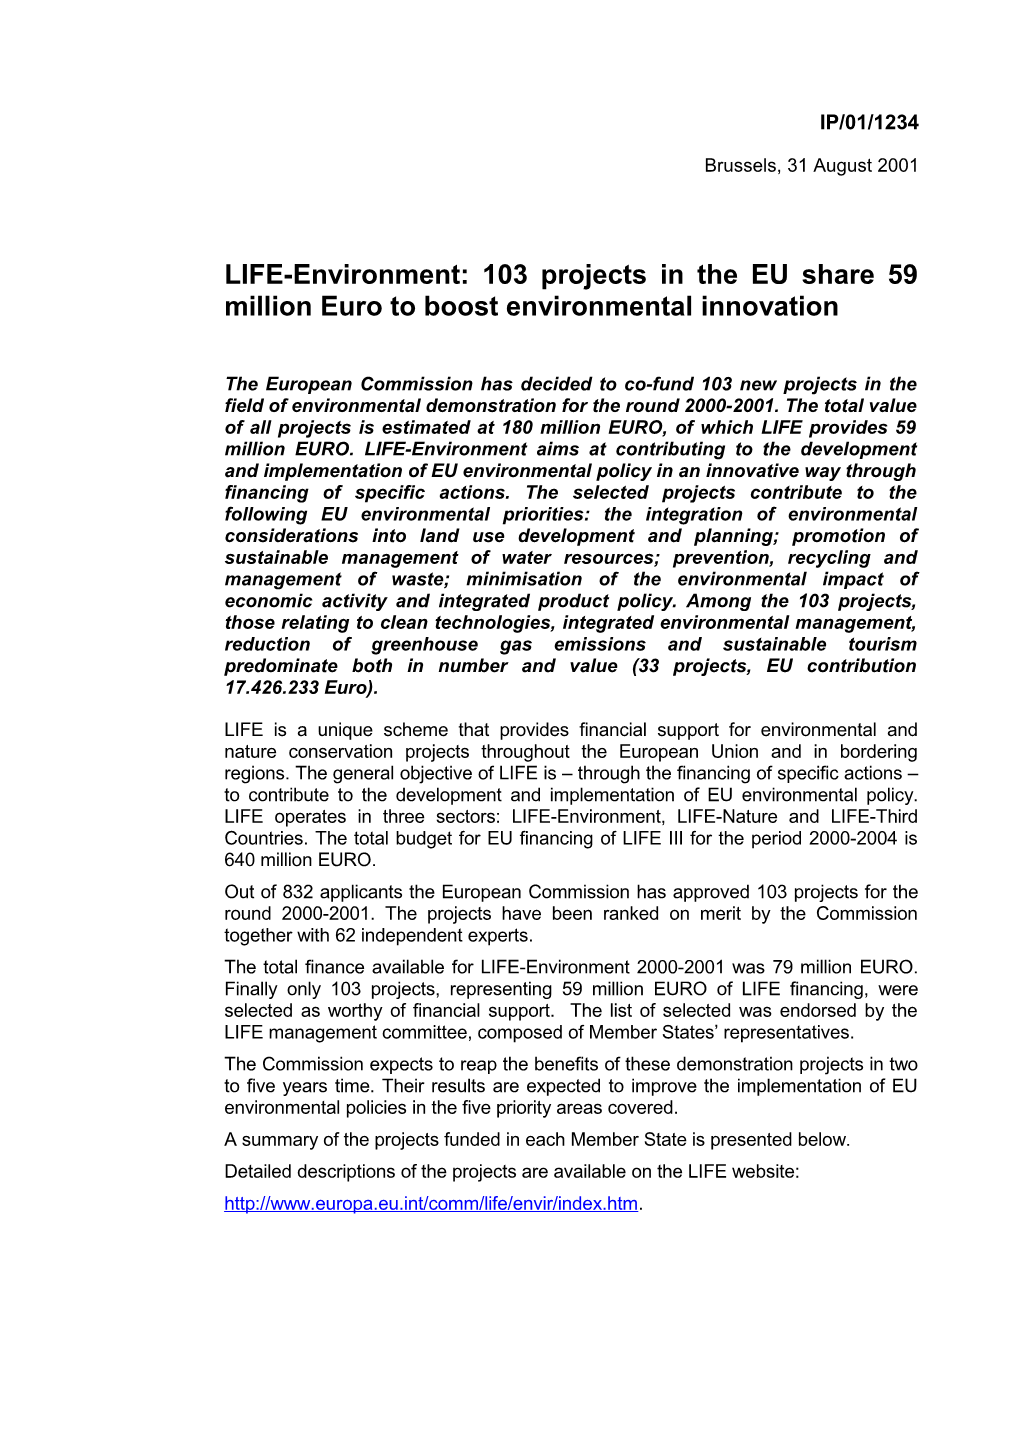 LIFE-Environment: 103 Projects in the EU Share 59 Million Euro to Boost Environmental